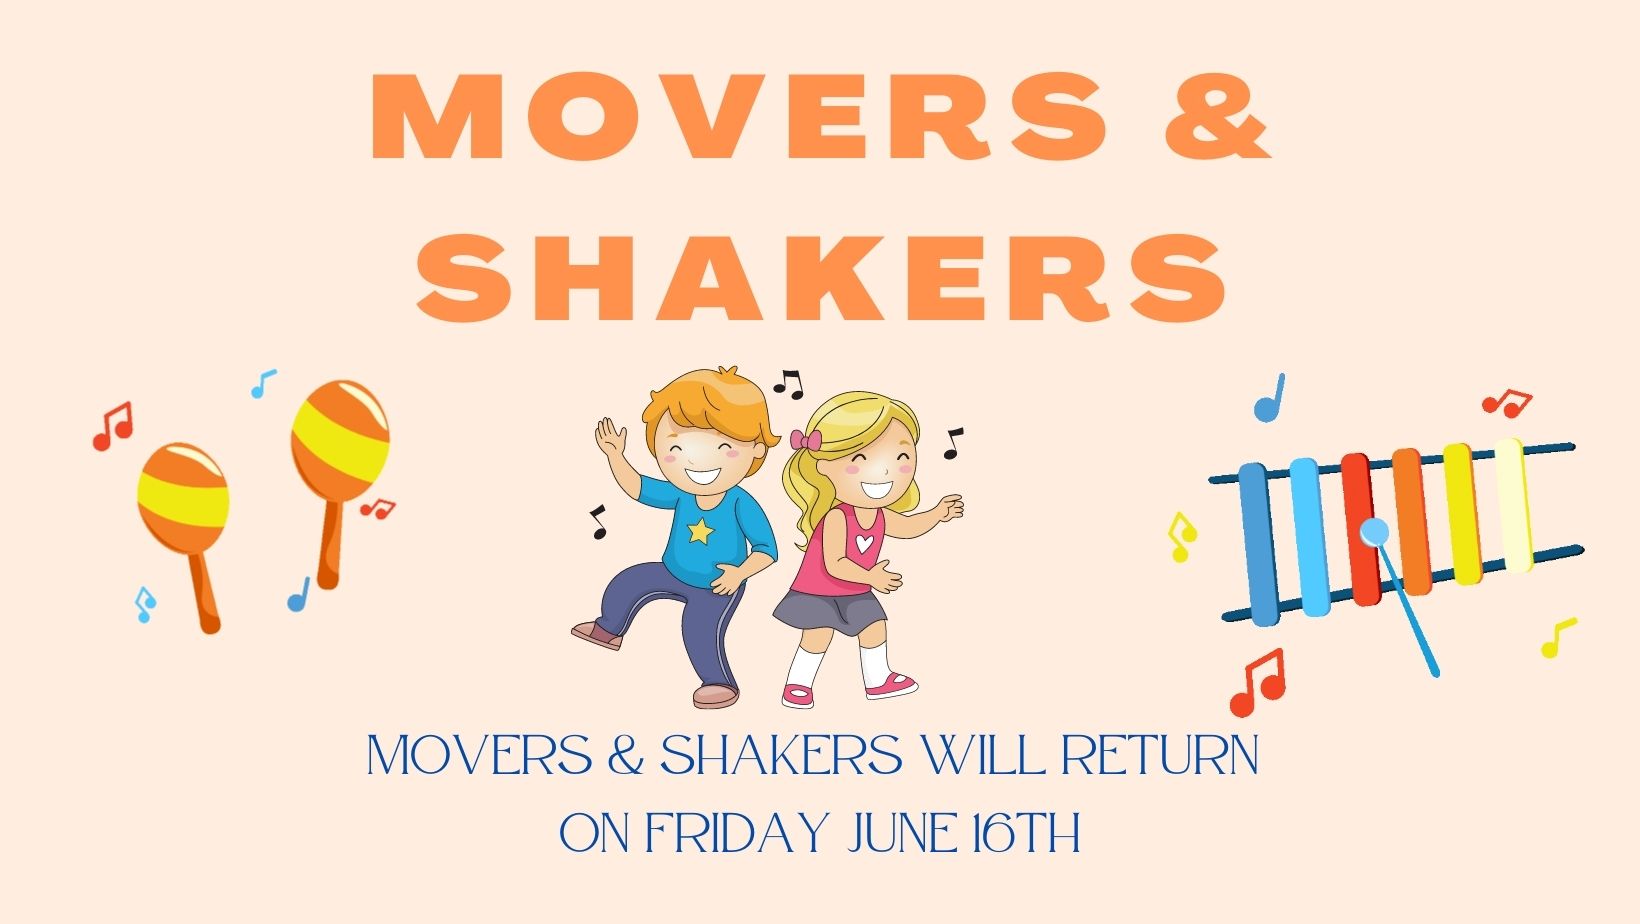 Movers & shakers summer session